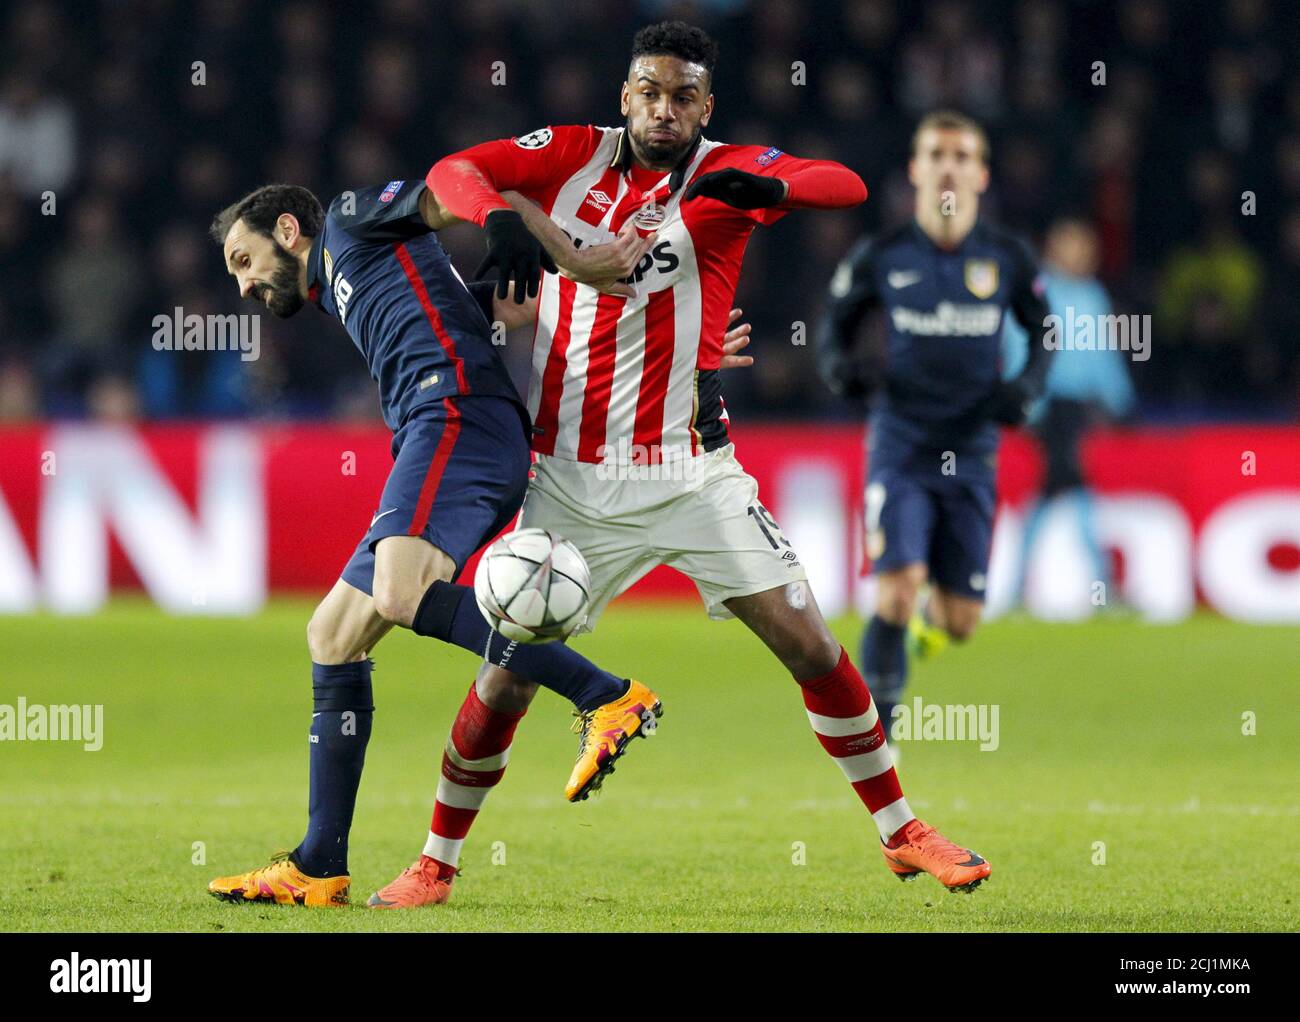 Football Soccer - PSV Eindhoven v Atletico Madrid - UEFA Champions League  Round of 16 First Leg - PSV stadium, Eindhoven, Netherlands - 24/2/16  Atletico Madrid's Juanfran in action against PSV Eindhoven's